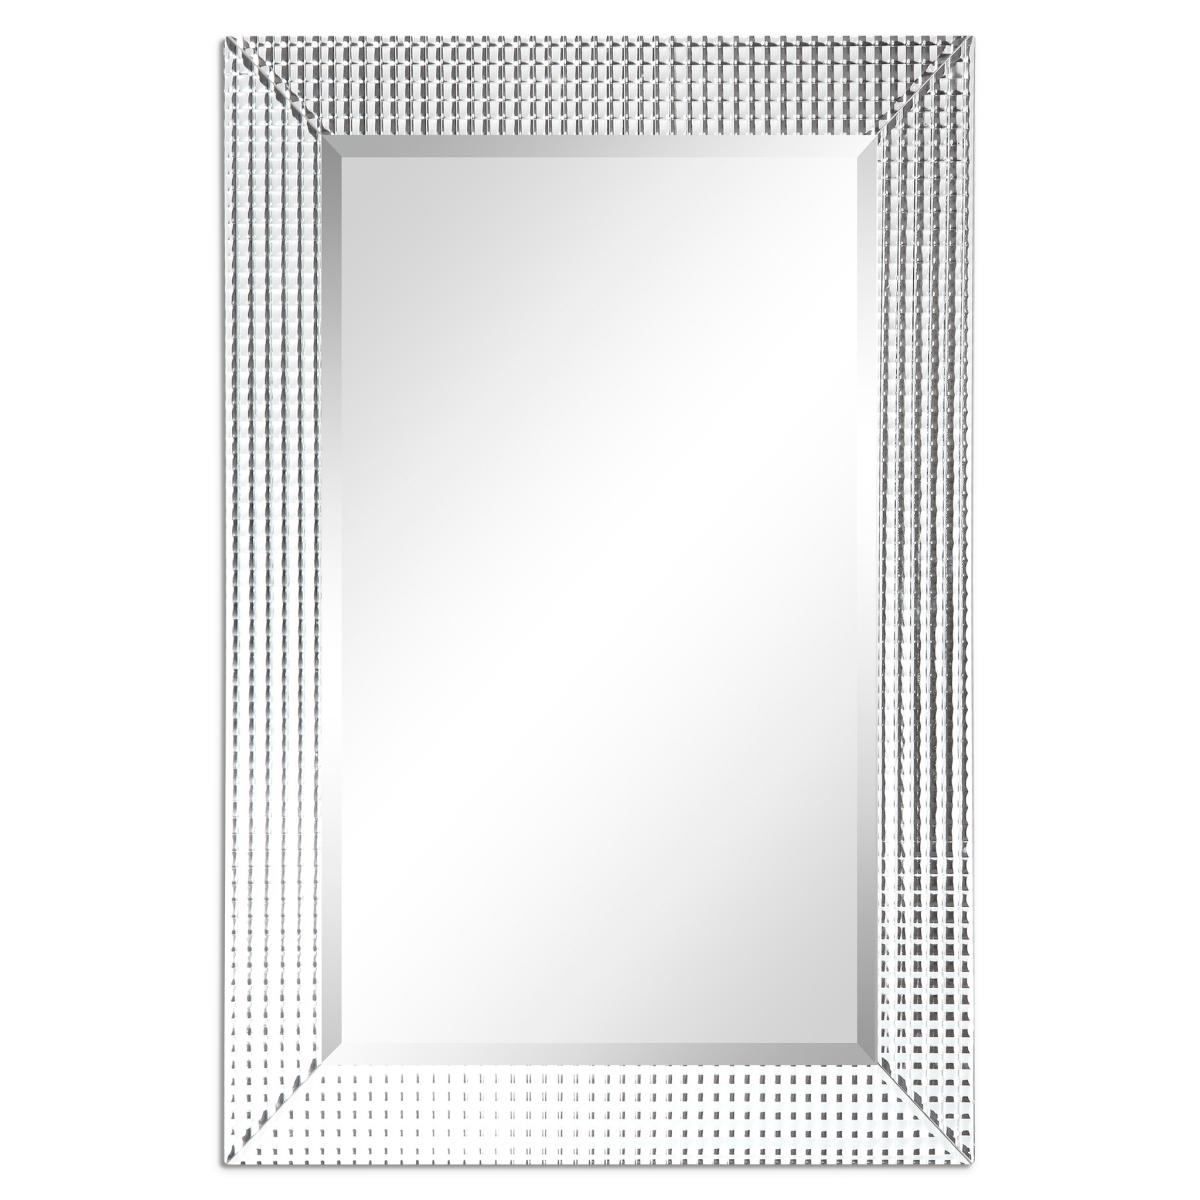 Mom-20030psm-2436 24 X 36 In. Solid Wood Frame Covered Wall Mirror With Beveled Prism Mirror Panels - 1 In. Beveled Edge